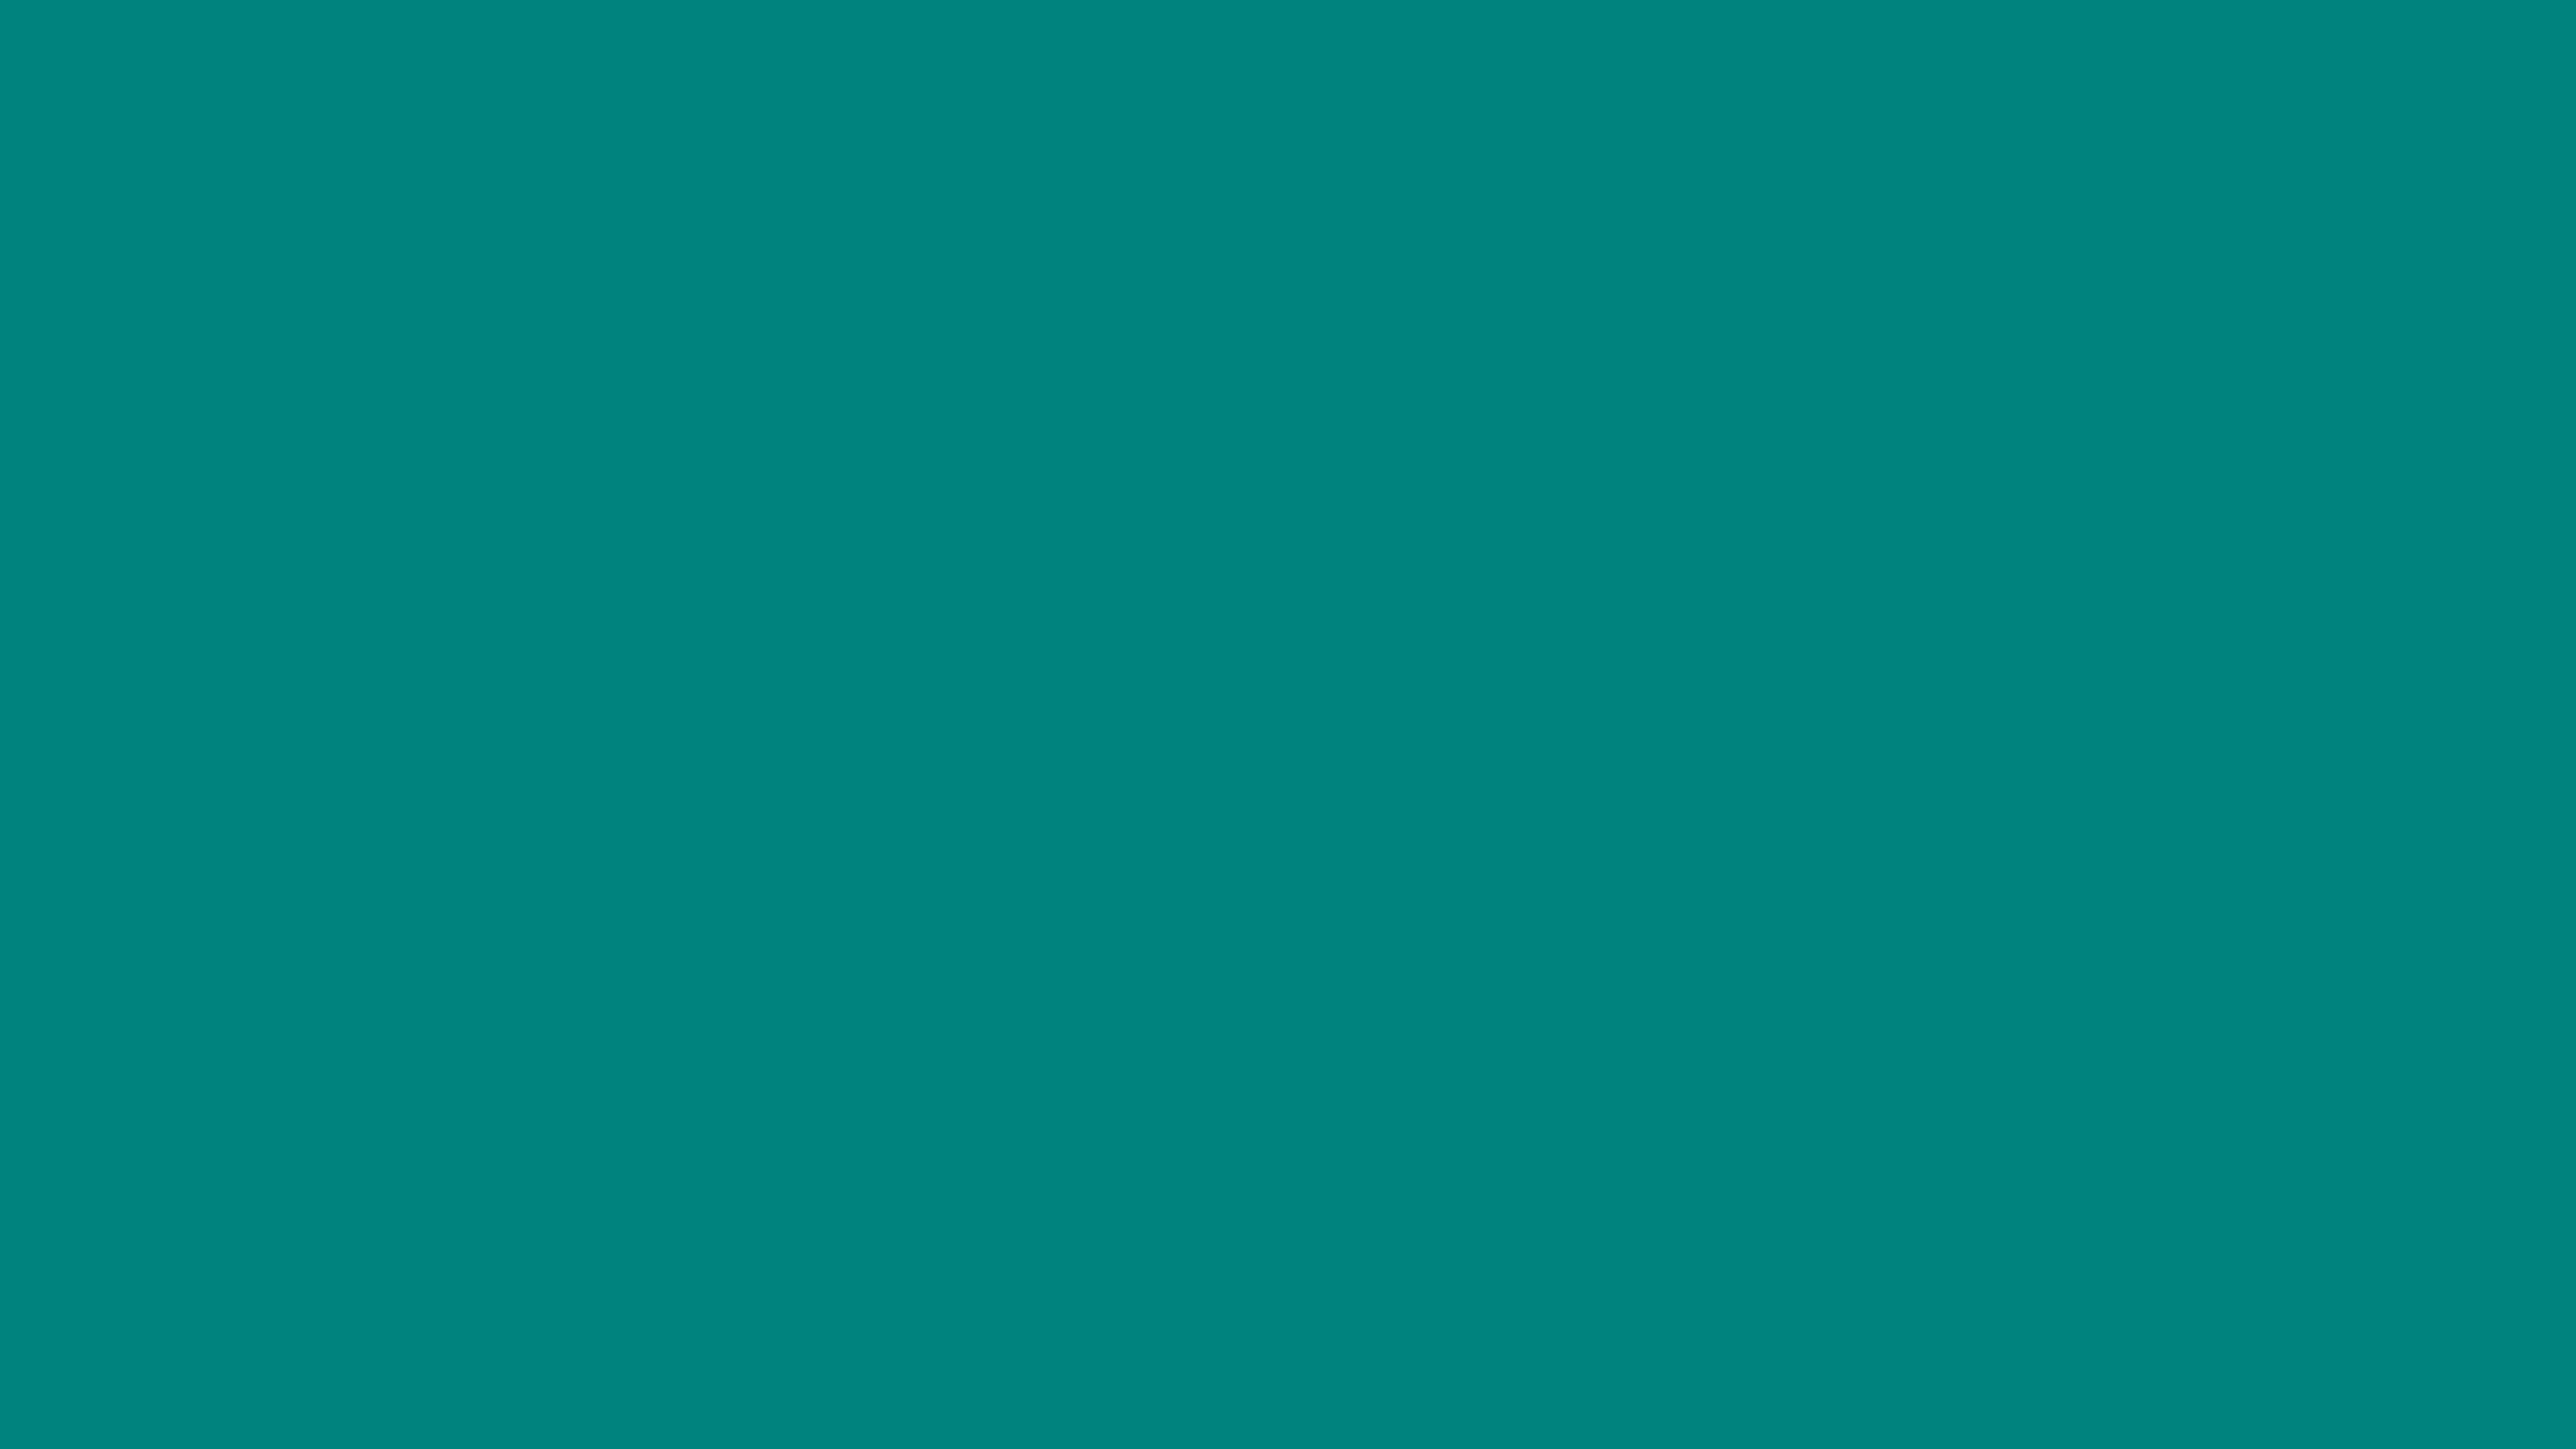 5120x2880 Teal Green Solid Color Background